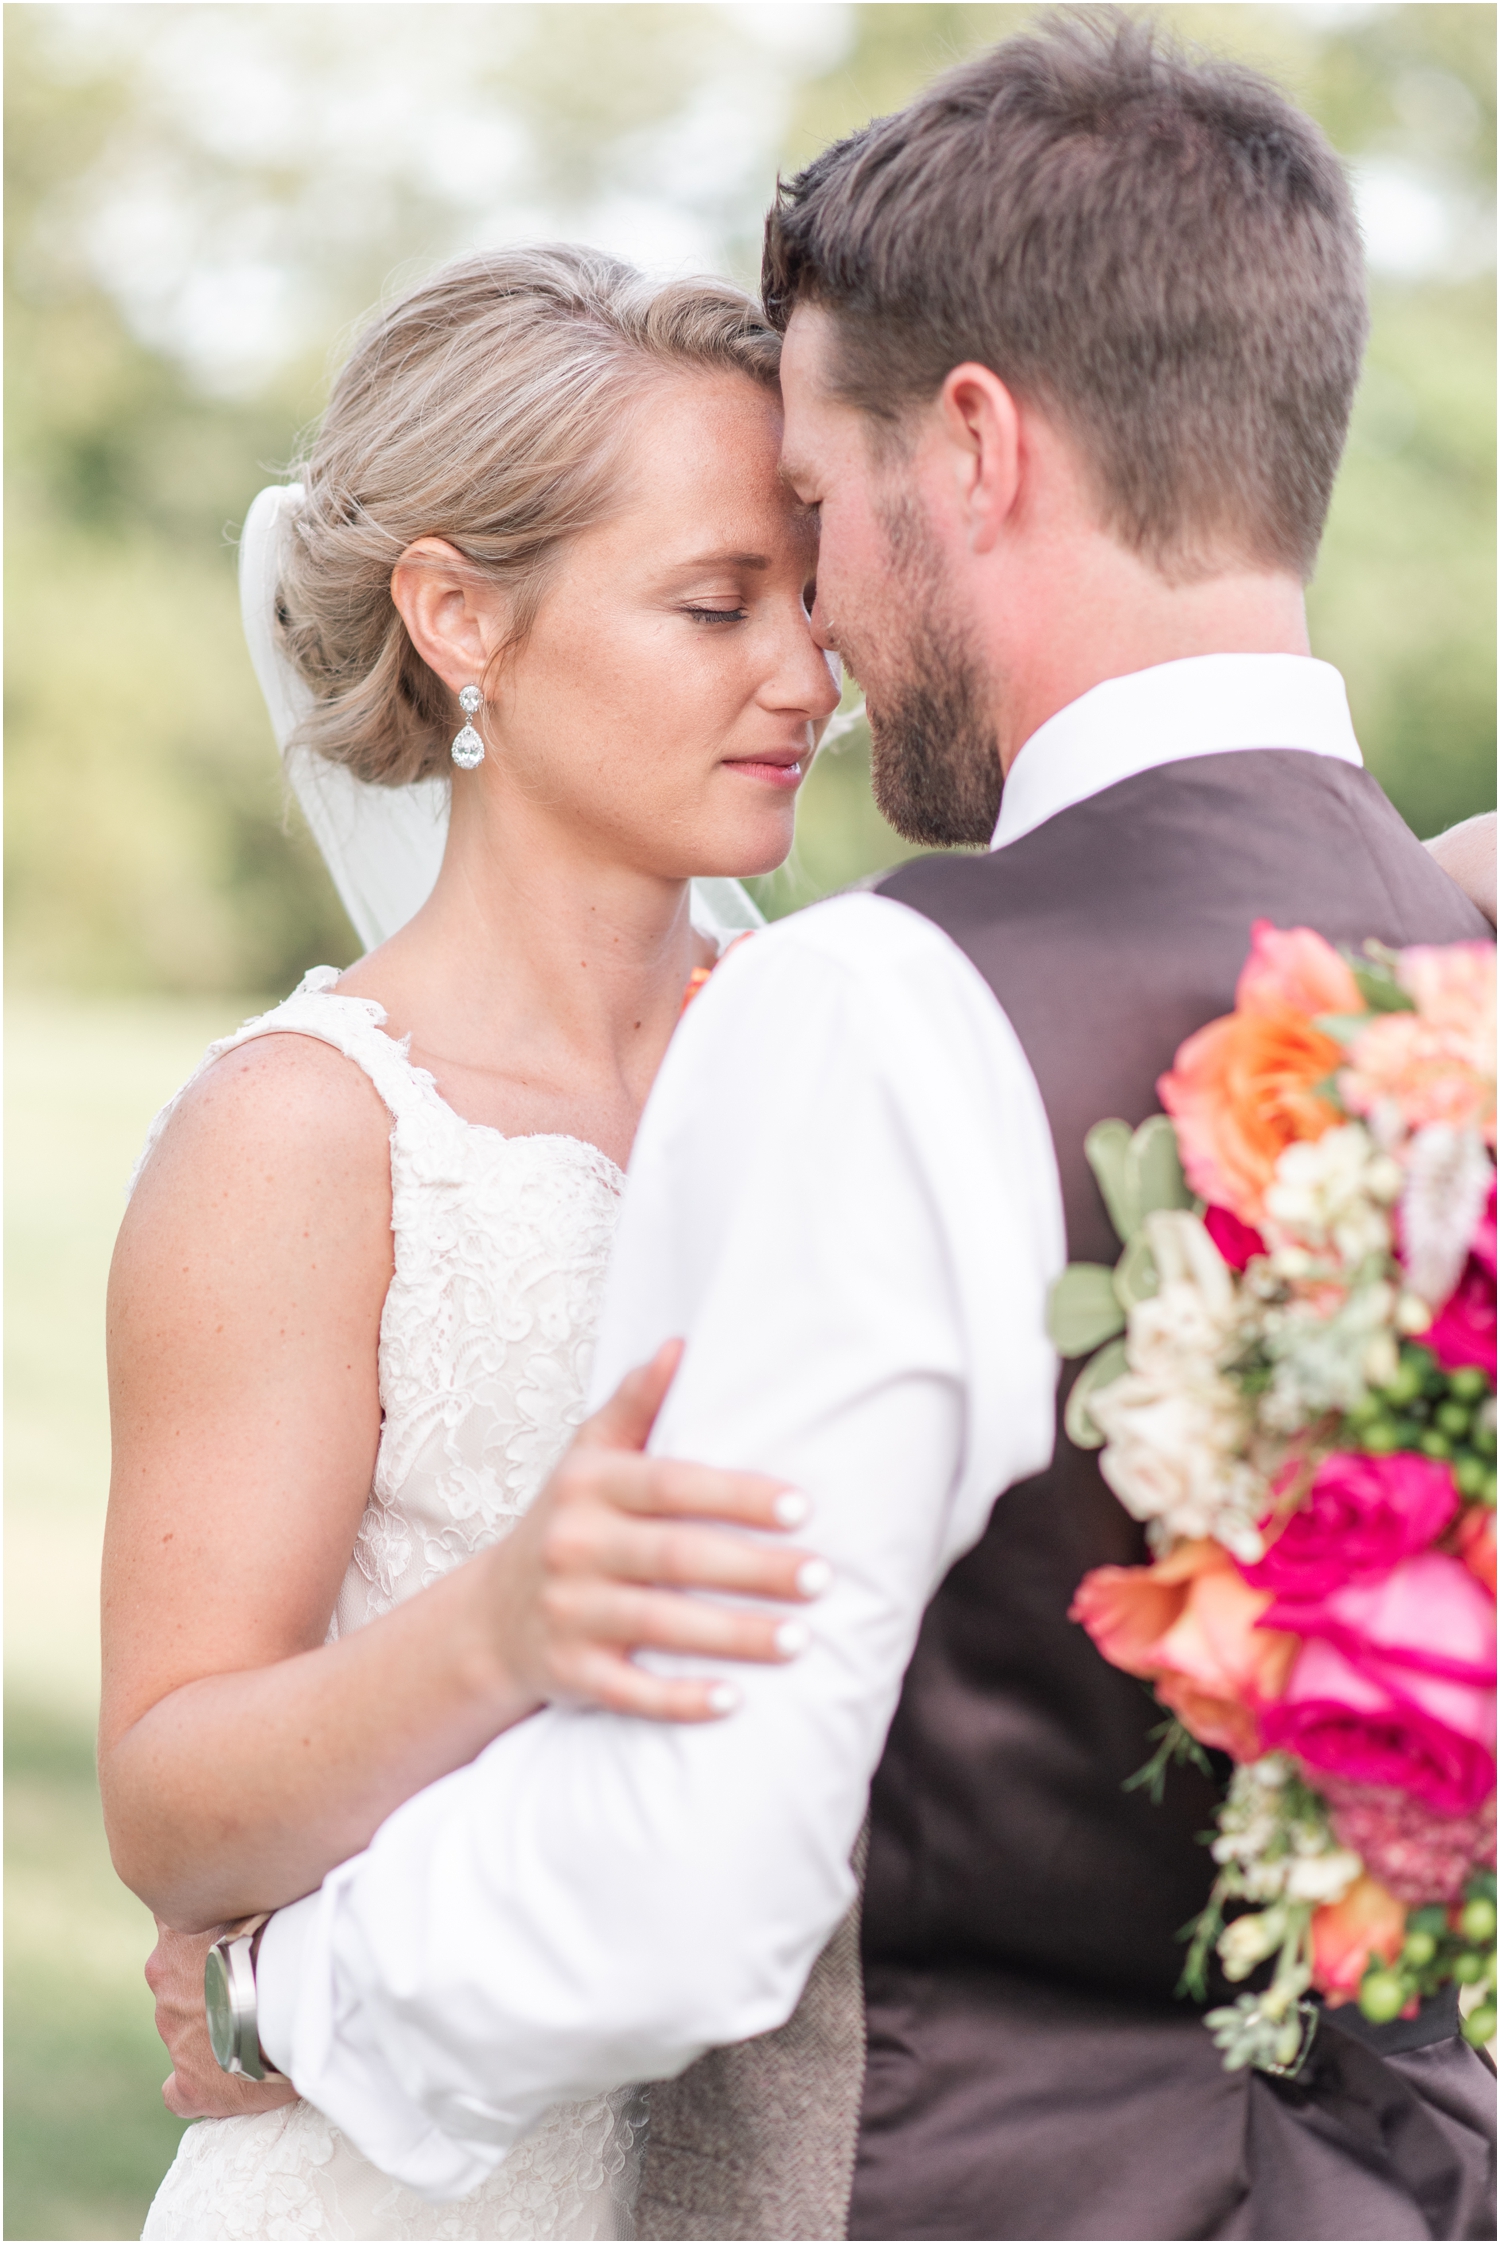 Bride and groom portraits outdoor ceremony Multi-Colored bridal bouquet The Barn at Kennedy Farm Wedding with bright, colorful bouquets and sage green bridesmaids Indiana Wedding Photographer Rose Courts Photography